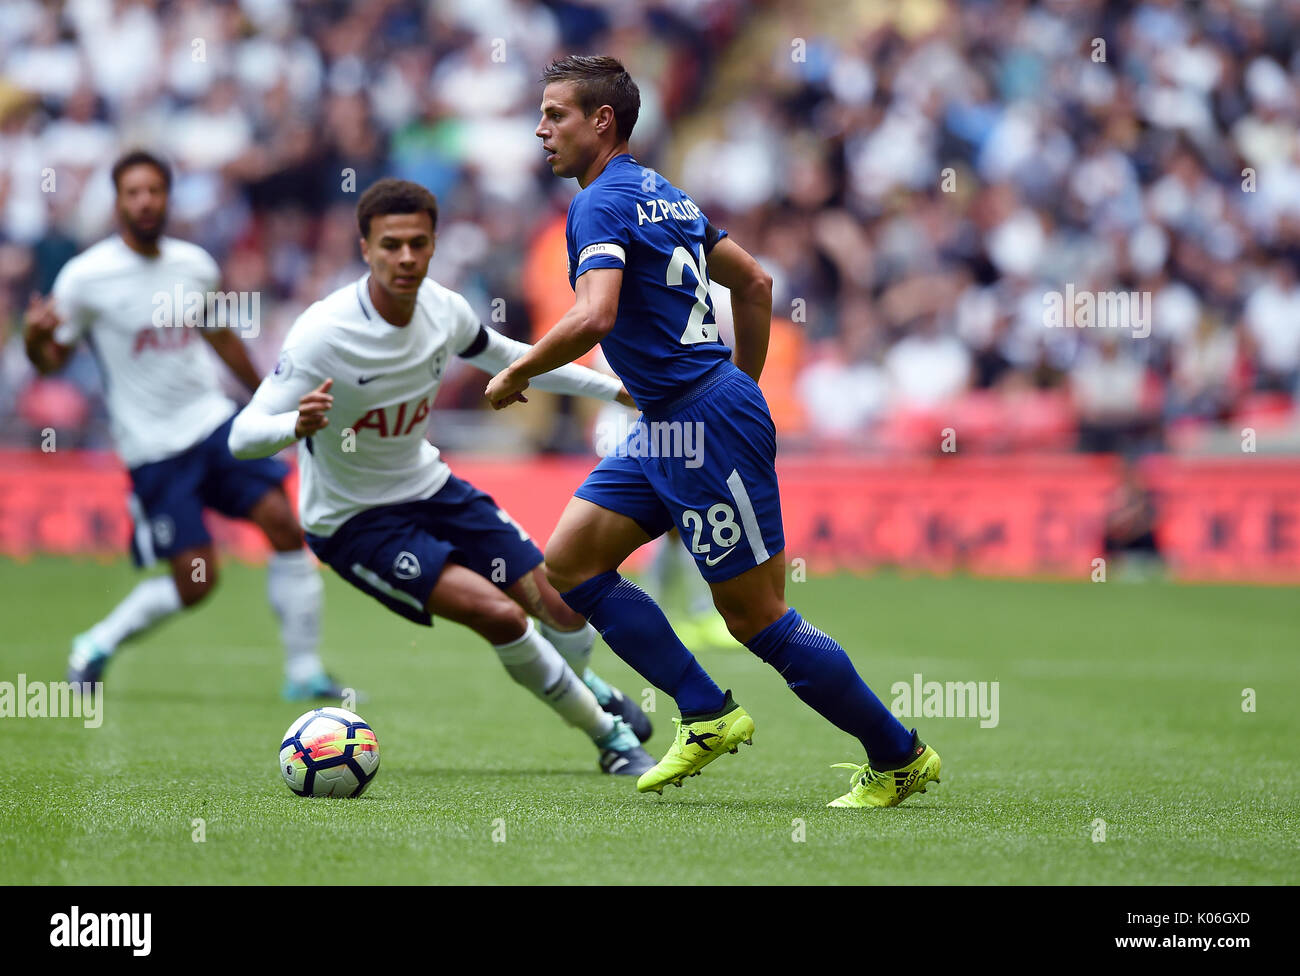 LONDON, ENGLAND - FEBRUARY 22, 2020: Reece James of Chelsea and Harry Winks  of Tottenham pictured during the 2019/20 Premier League game between Chelsea  FC and Tottenham Hotspur FC at Stamford Bridge Stock Photo - Alamy